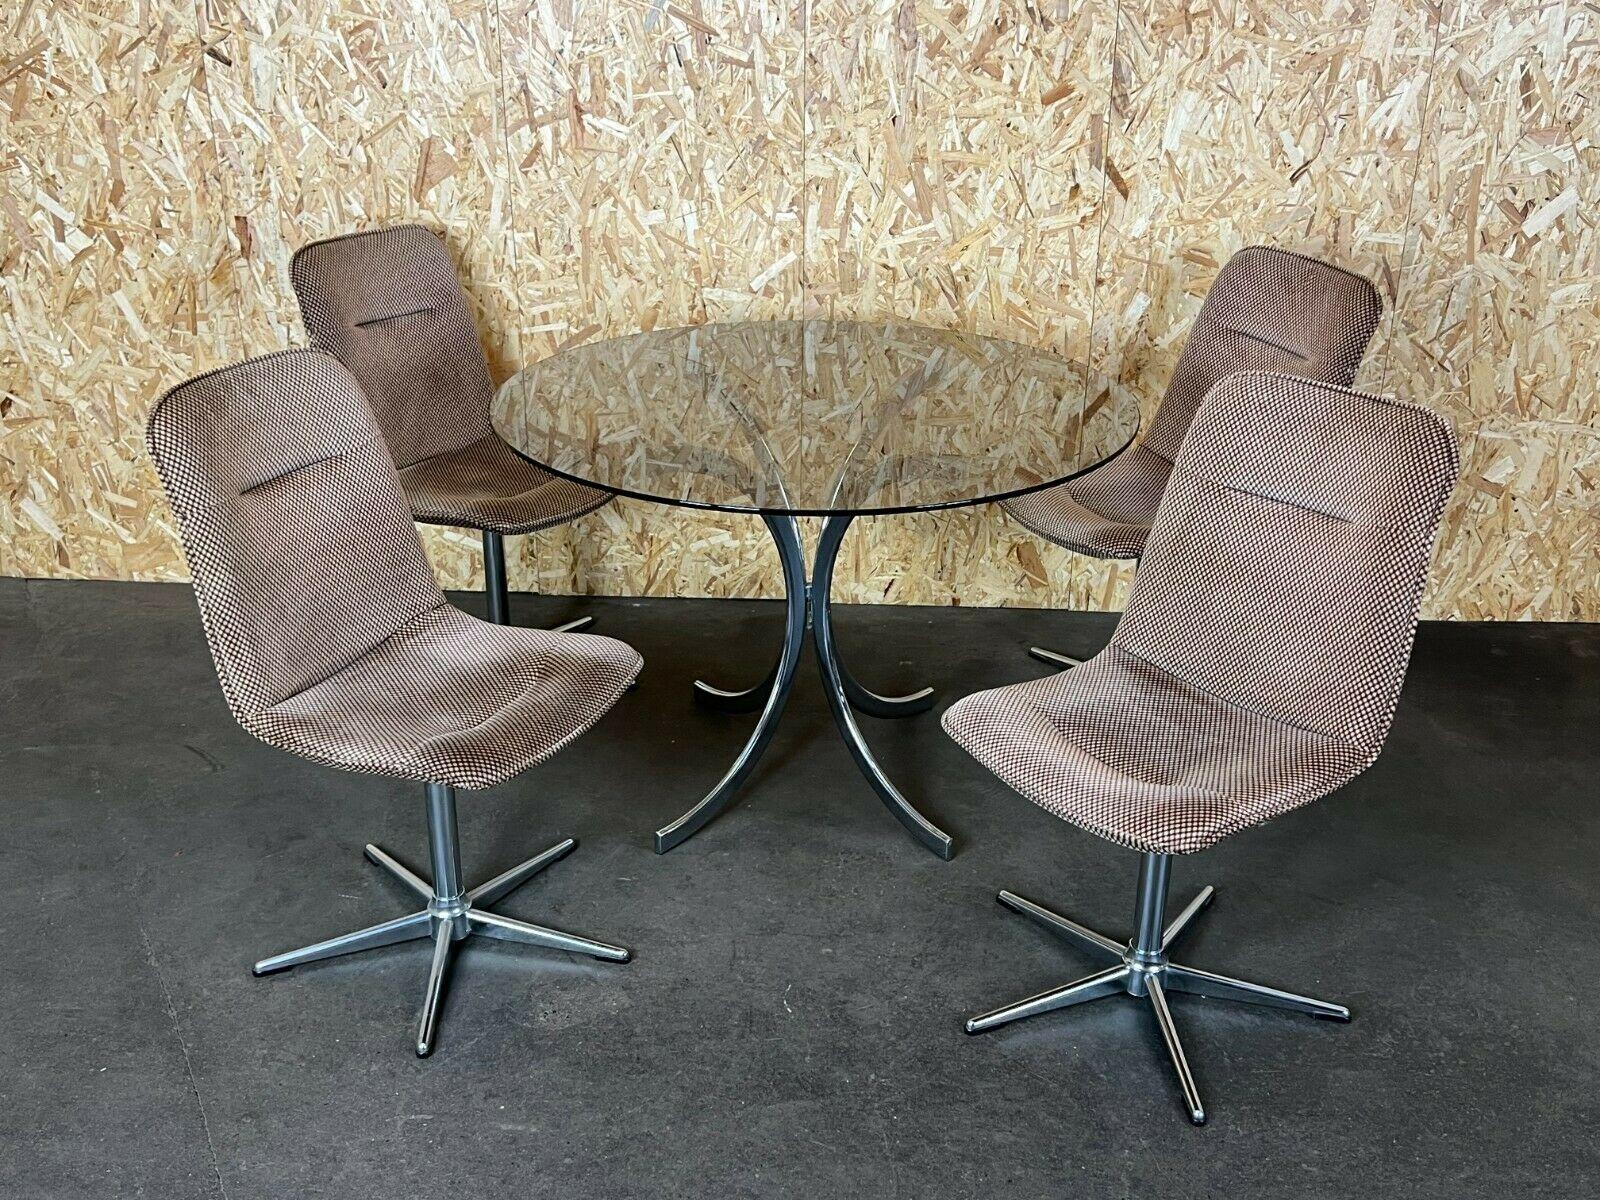 60s 70s 4x chairs chair & table Dining Chairs Dining Table Design 60s

Object: 4x chair & table

Manufacturer:

Condition: good - vintage

Age: around 1960-1970

Dimensions:

48cm x 63cm x 90cm
Seat height = 45cm

Diameter =